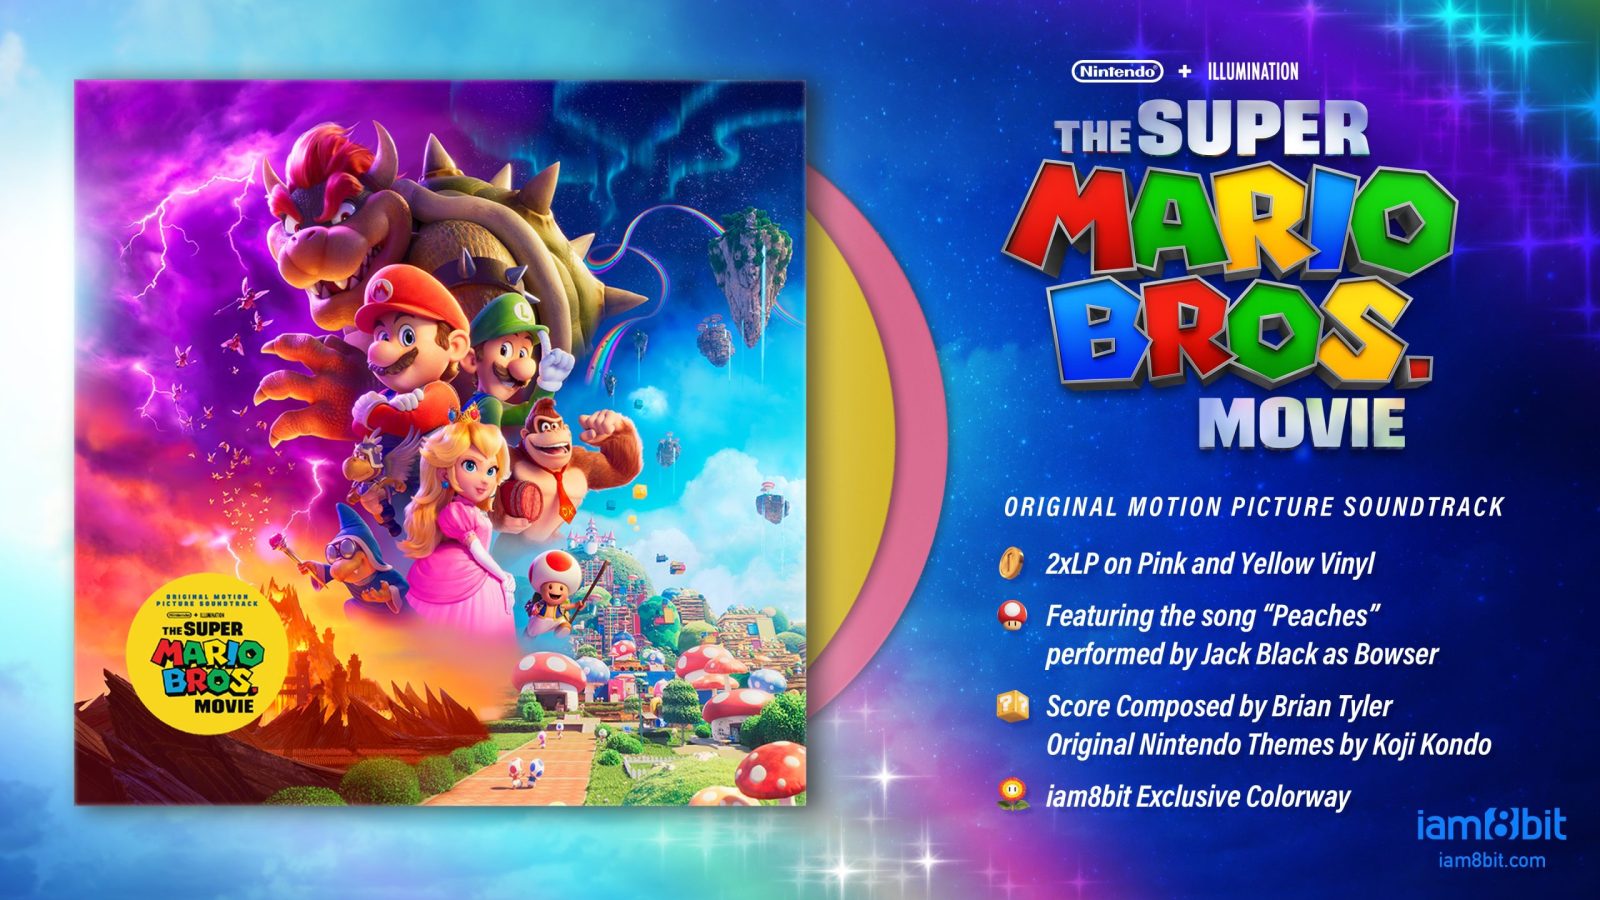 Super Mario Bros Movie soundtrack: List of songs in video game